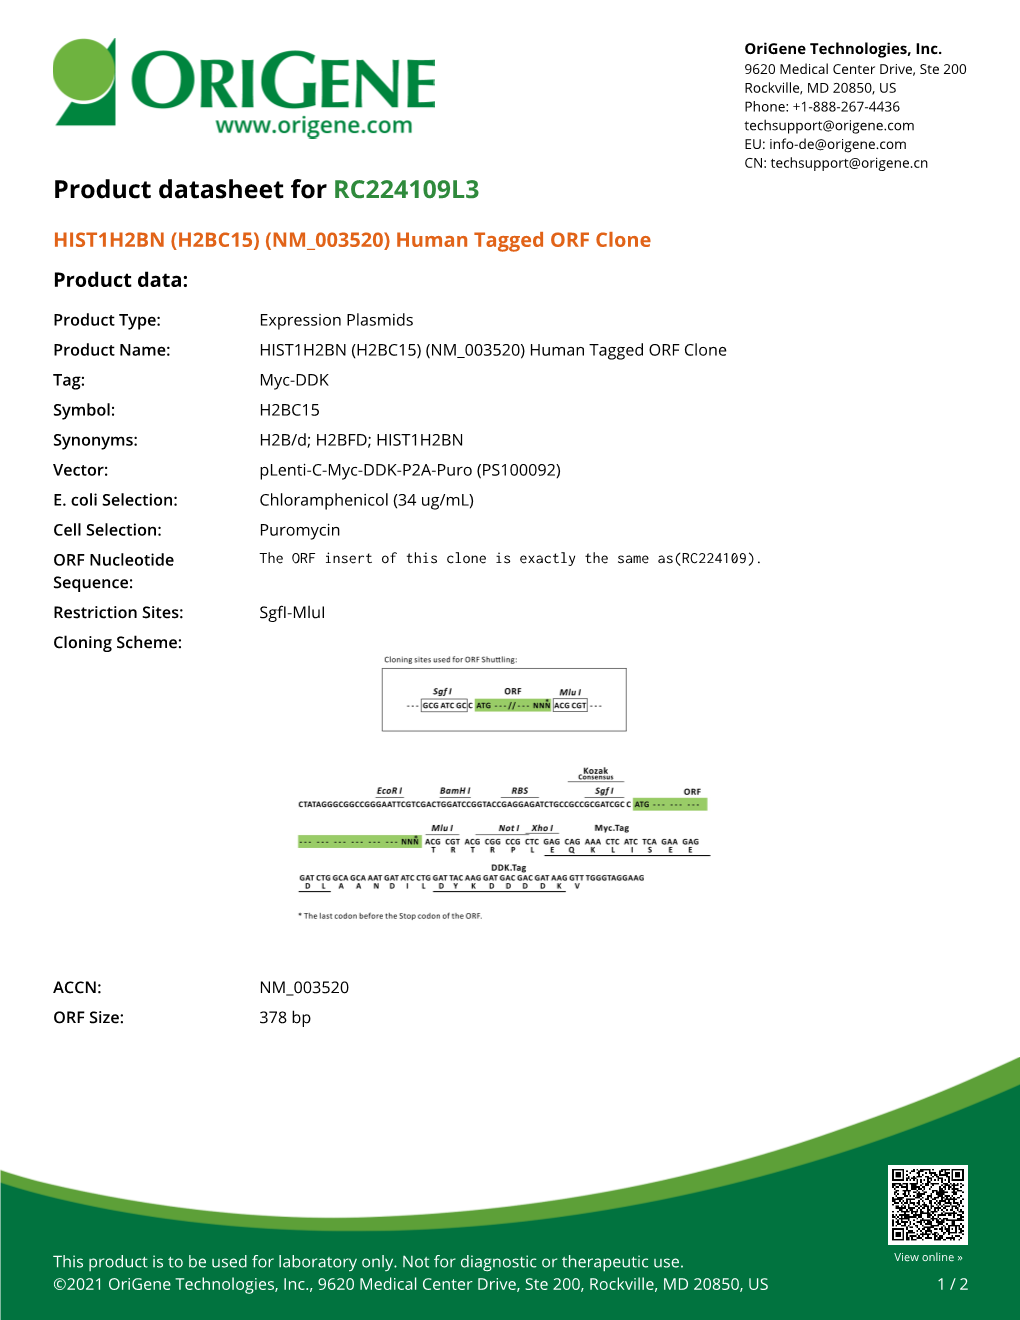 HIST1H2BN (H2BC15) (NM 003520) Human Tagged ORF Clone Product Data